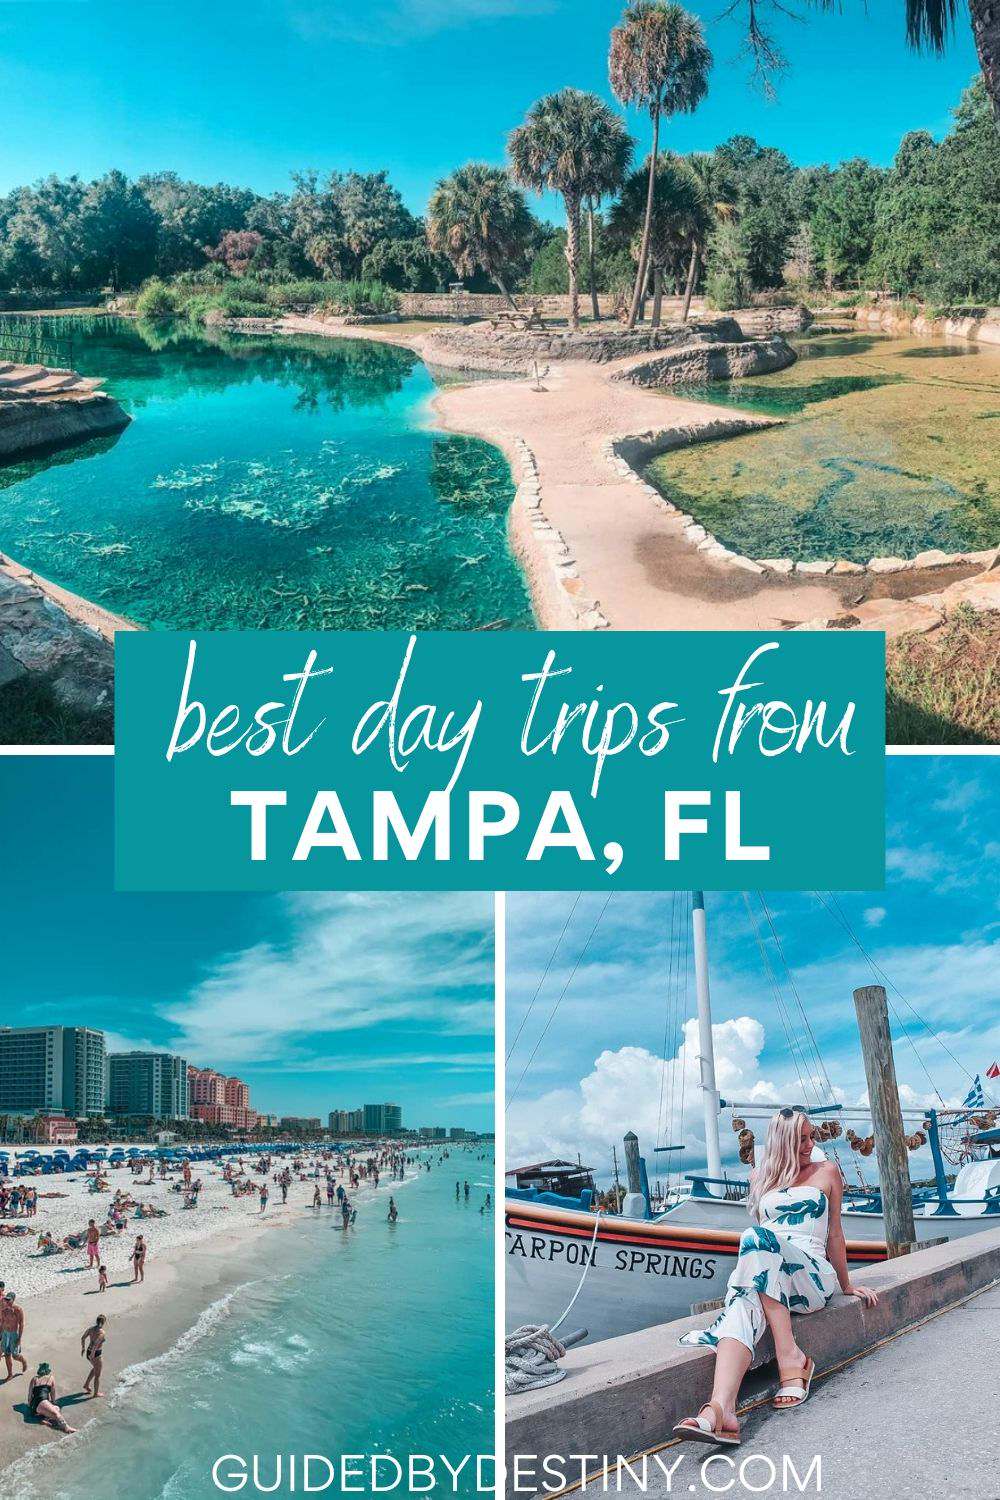 best day trips from tampa, fl